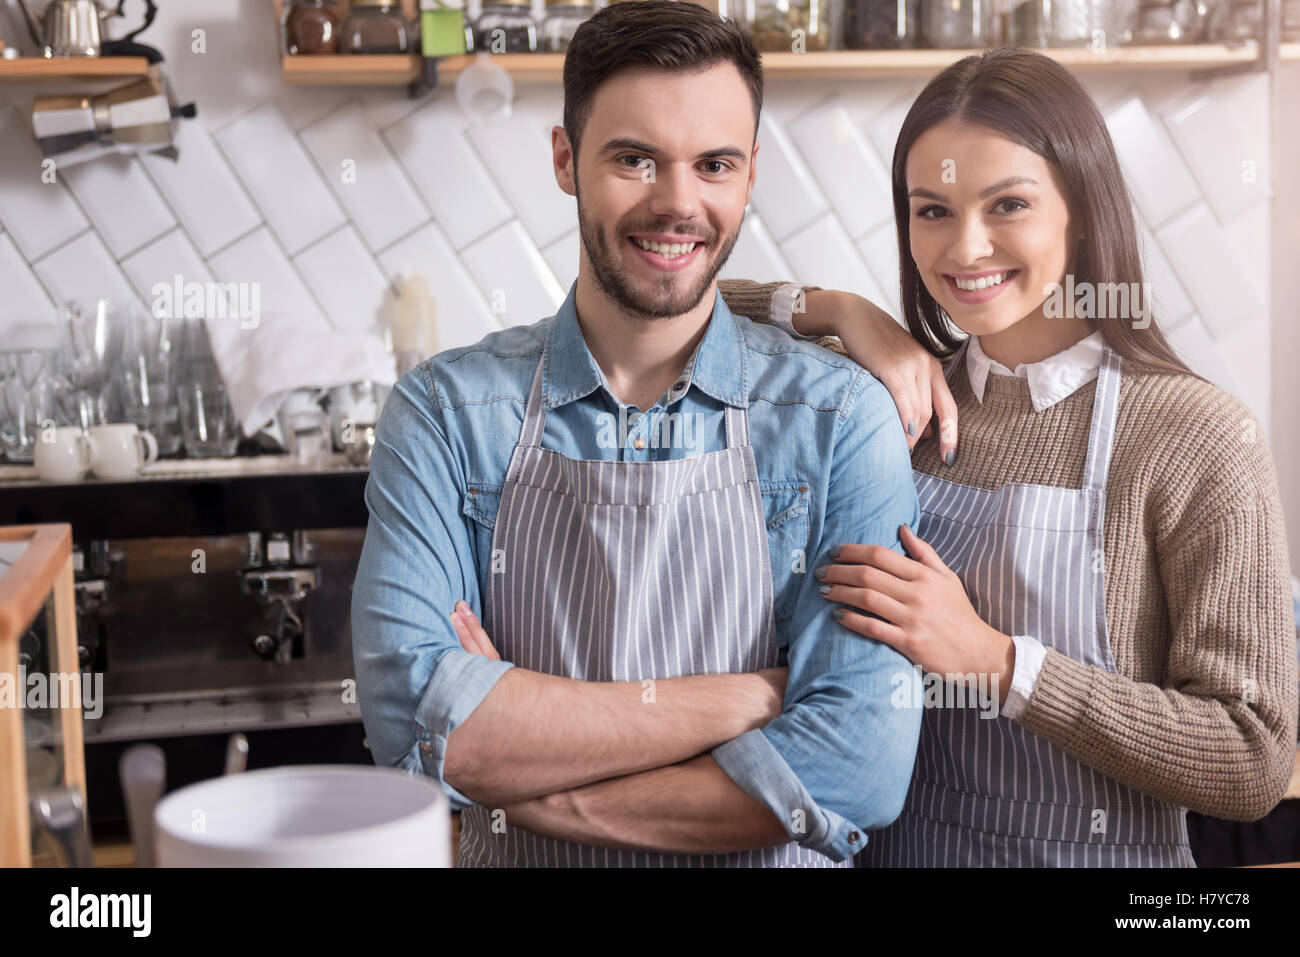 Smiling young couple hugging and standing behind the bar. Stock Photo